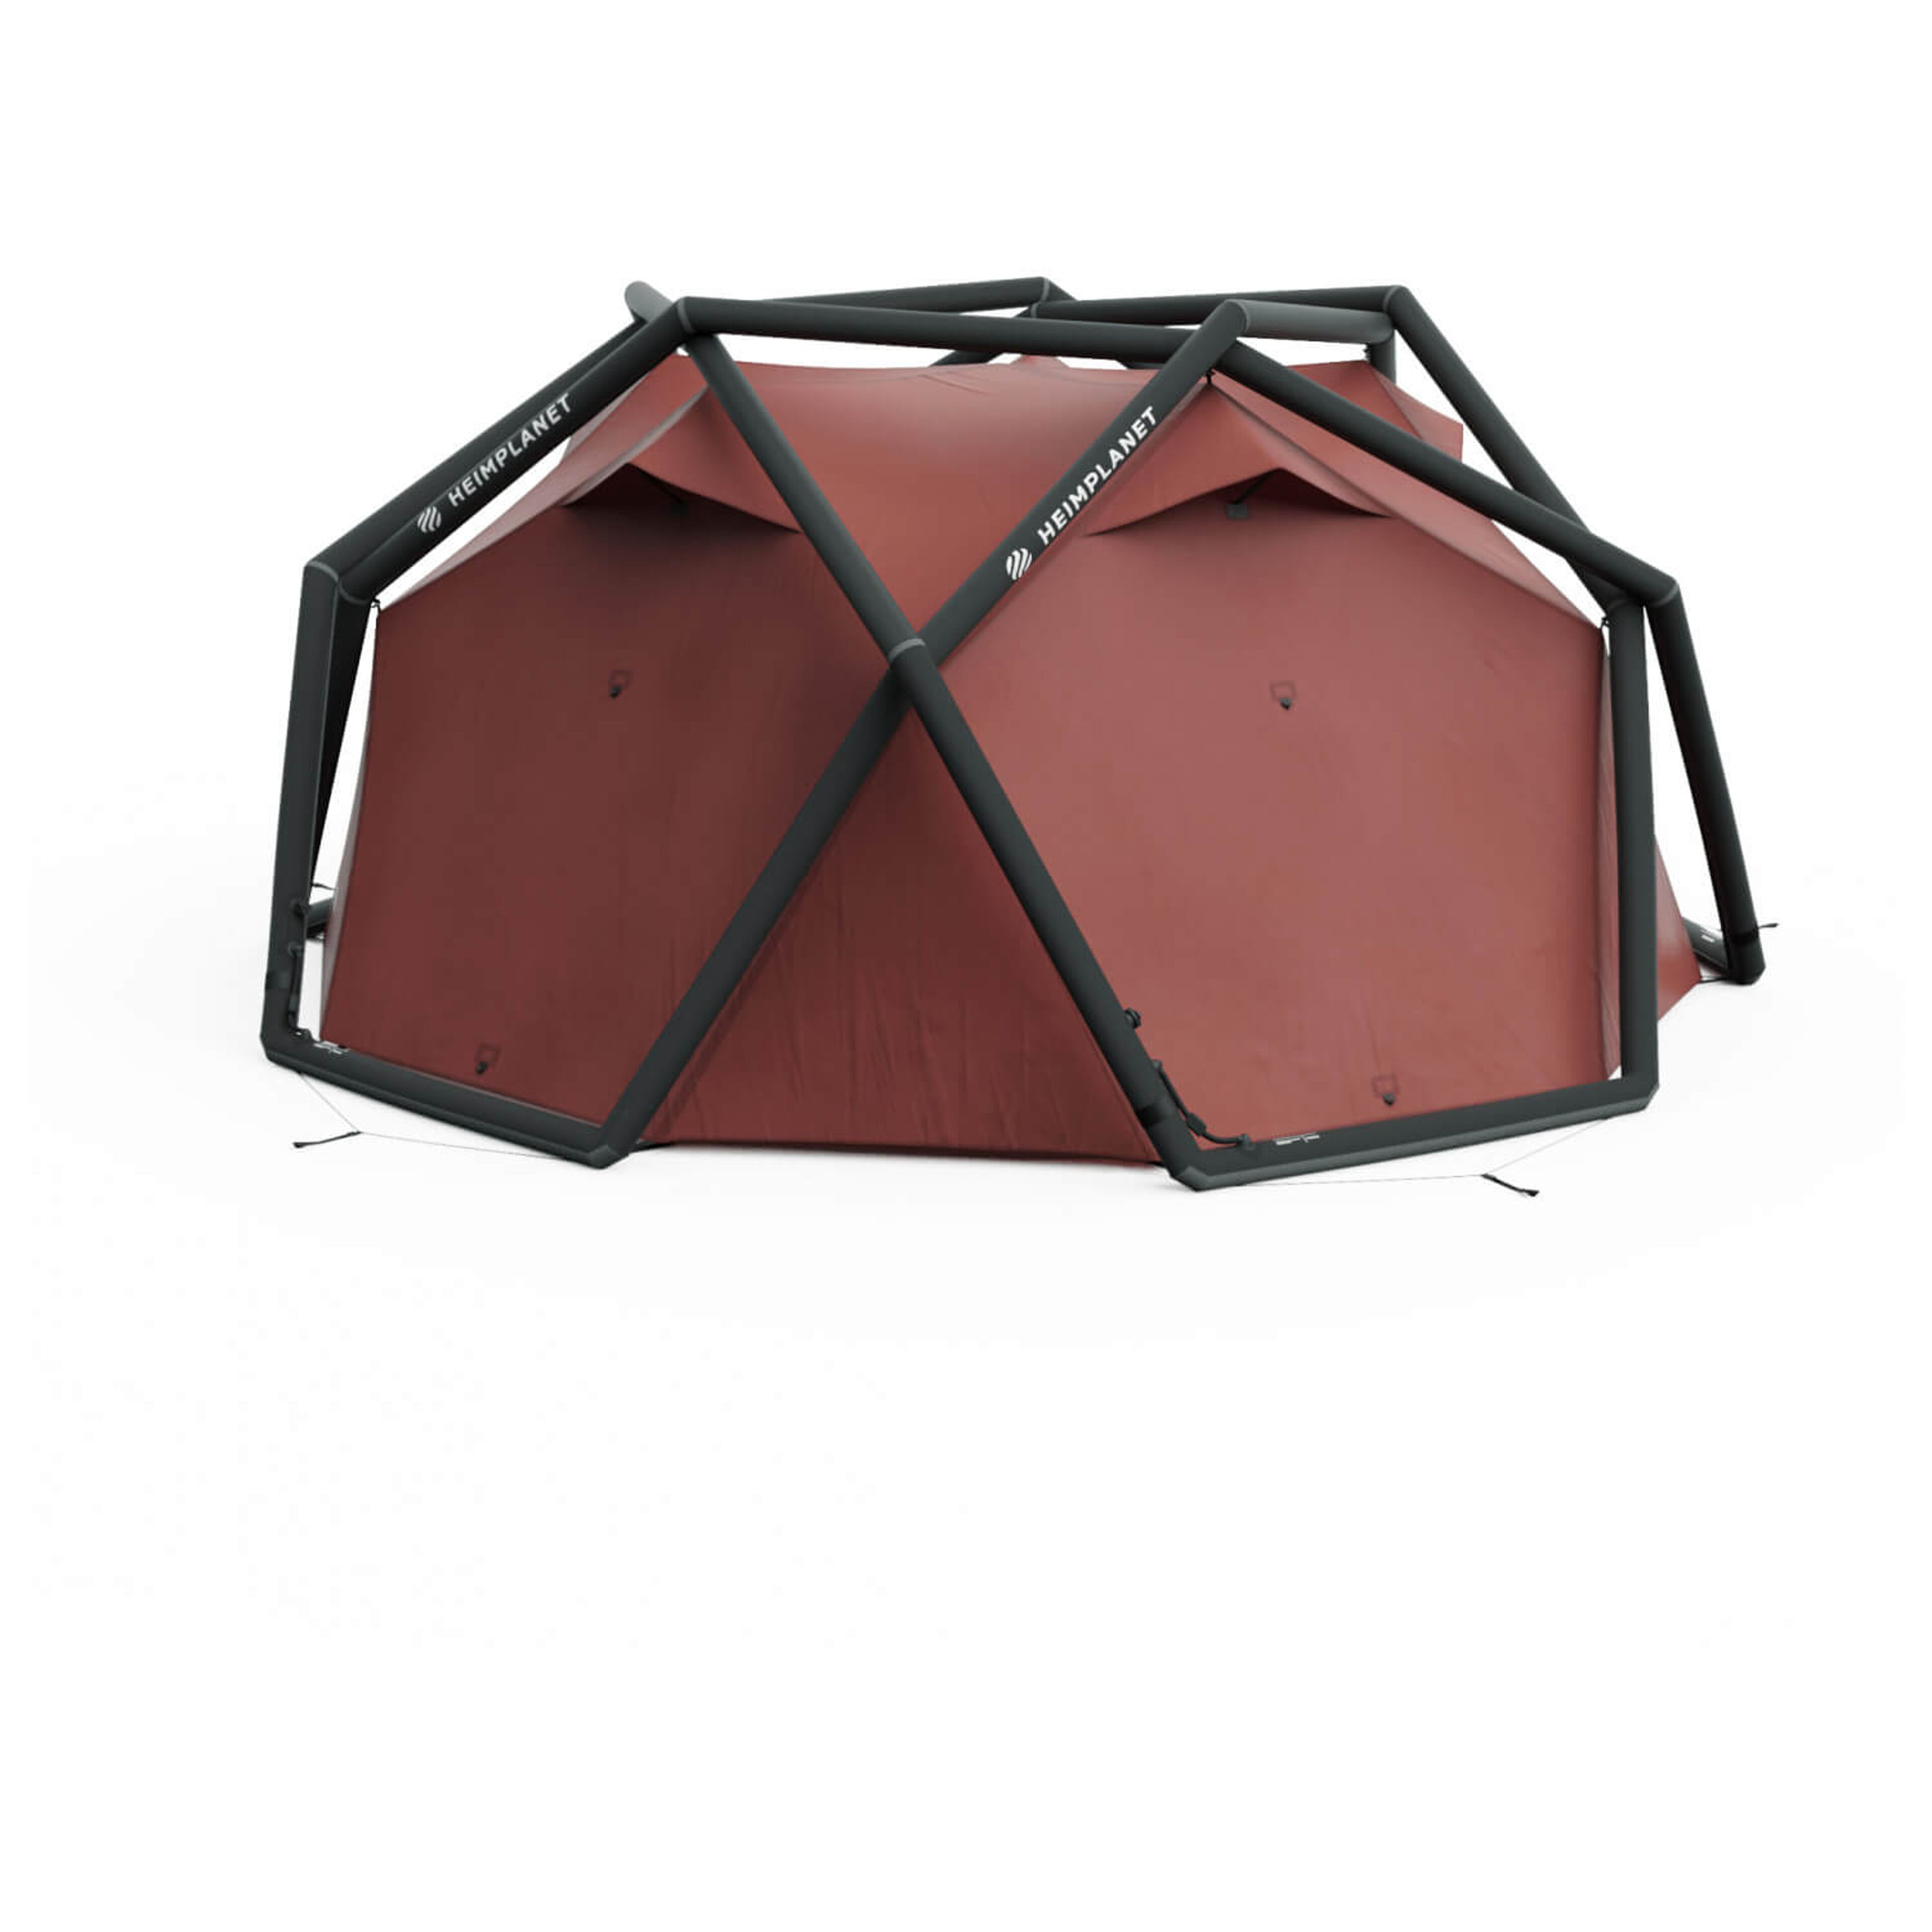 Heimplanet The Cave XL 4-Season Tent